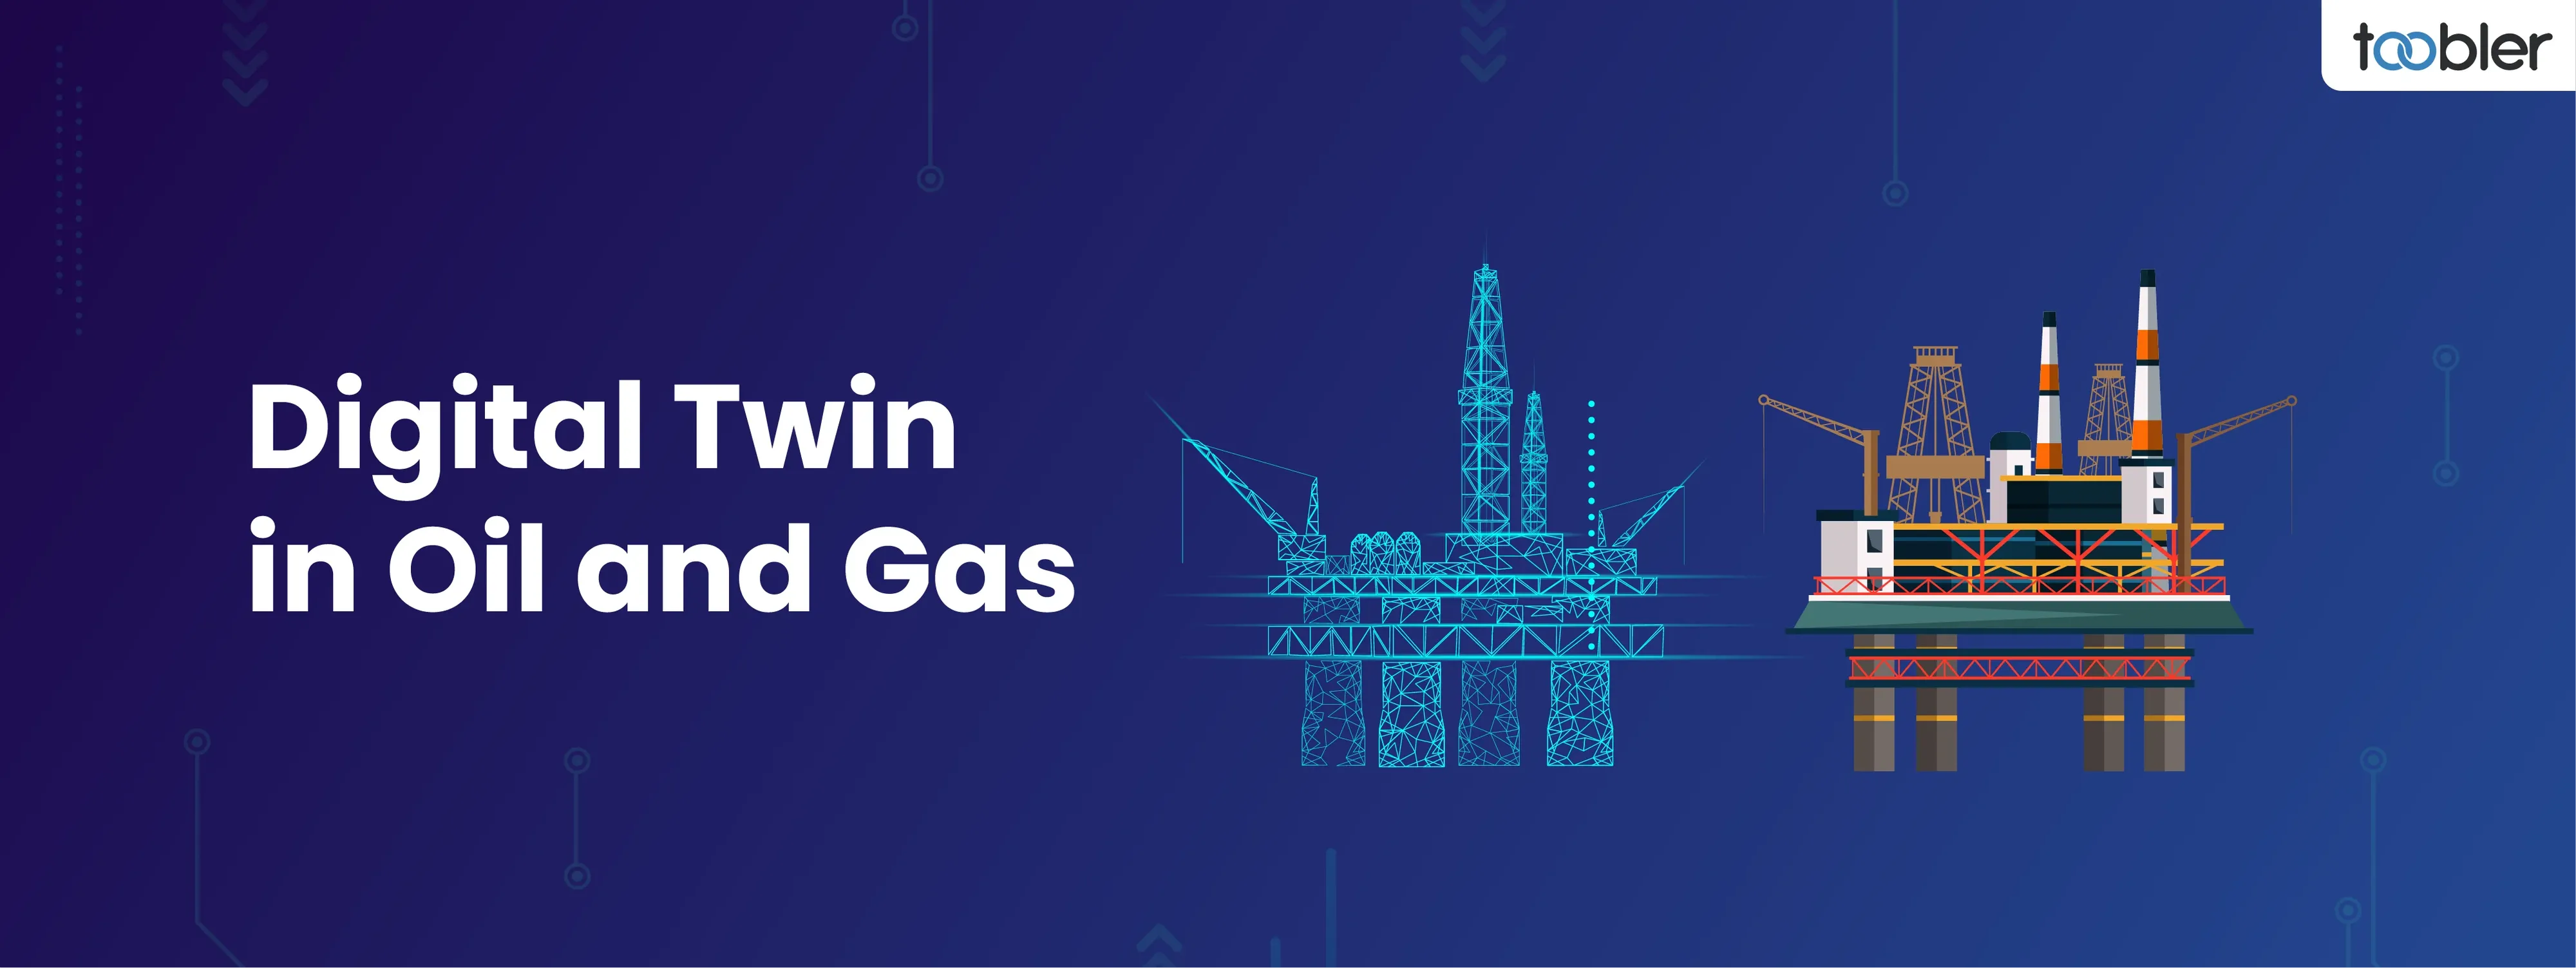 Digital Twin in Oil and Gas: Use Cases and Benefits